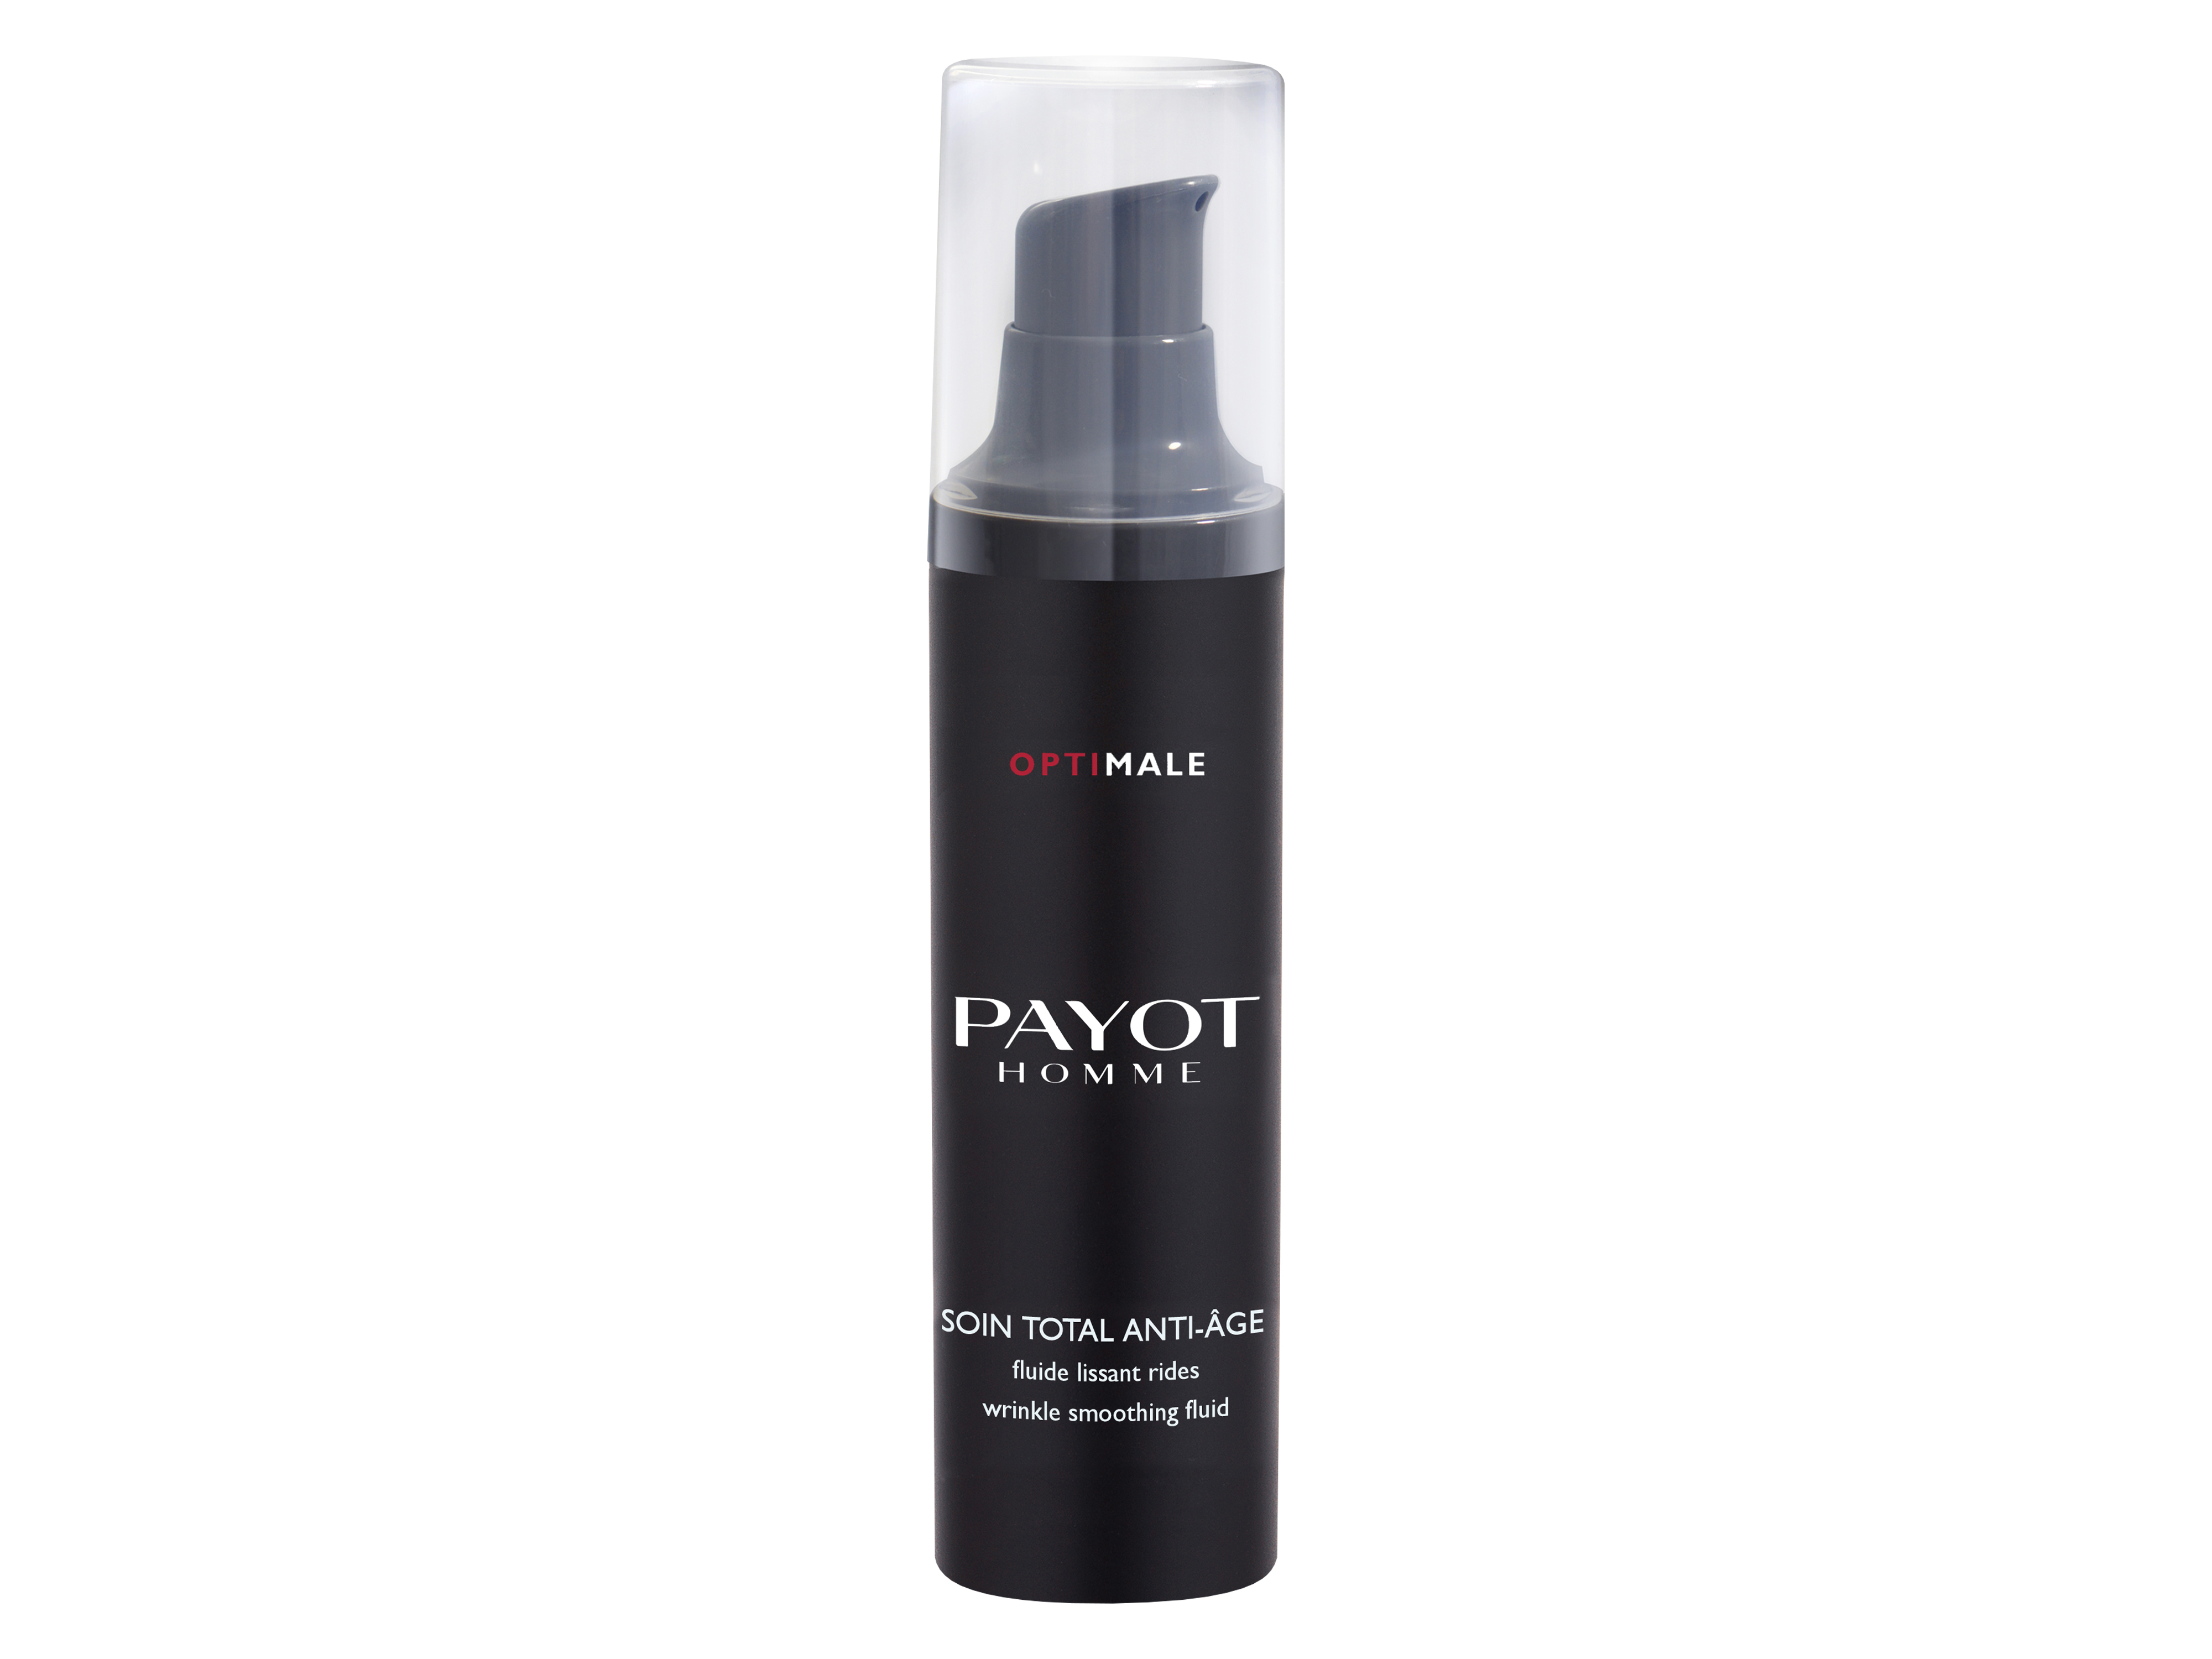 Payot Homme Optimale Soin Total Anti-Age, 50 ml